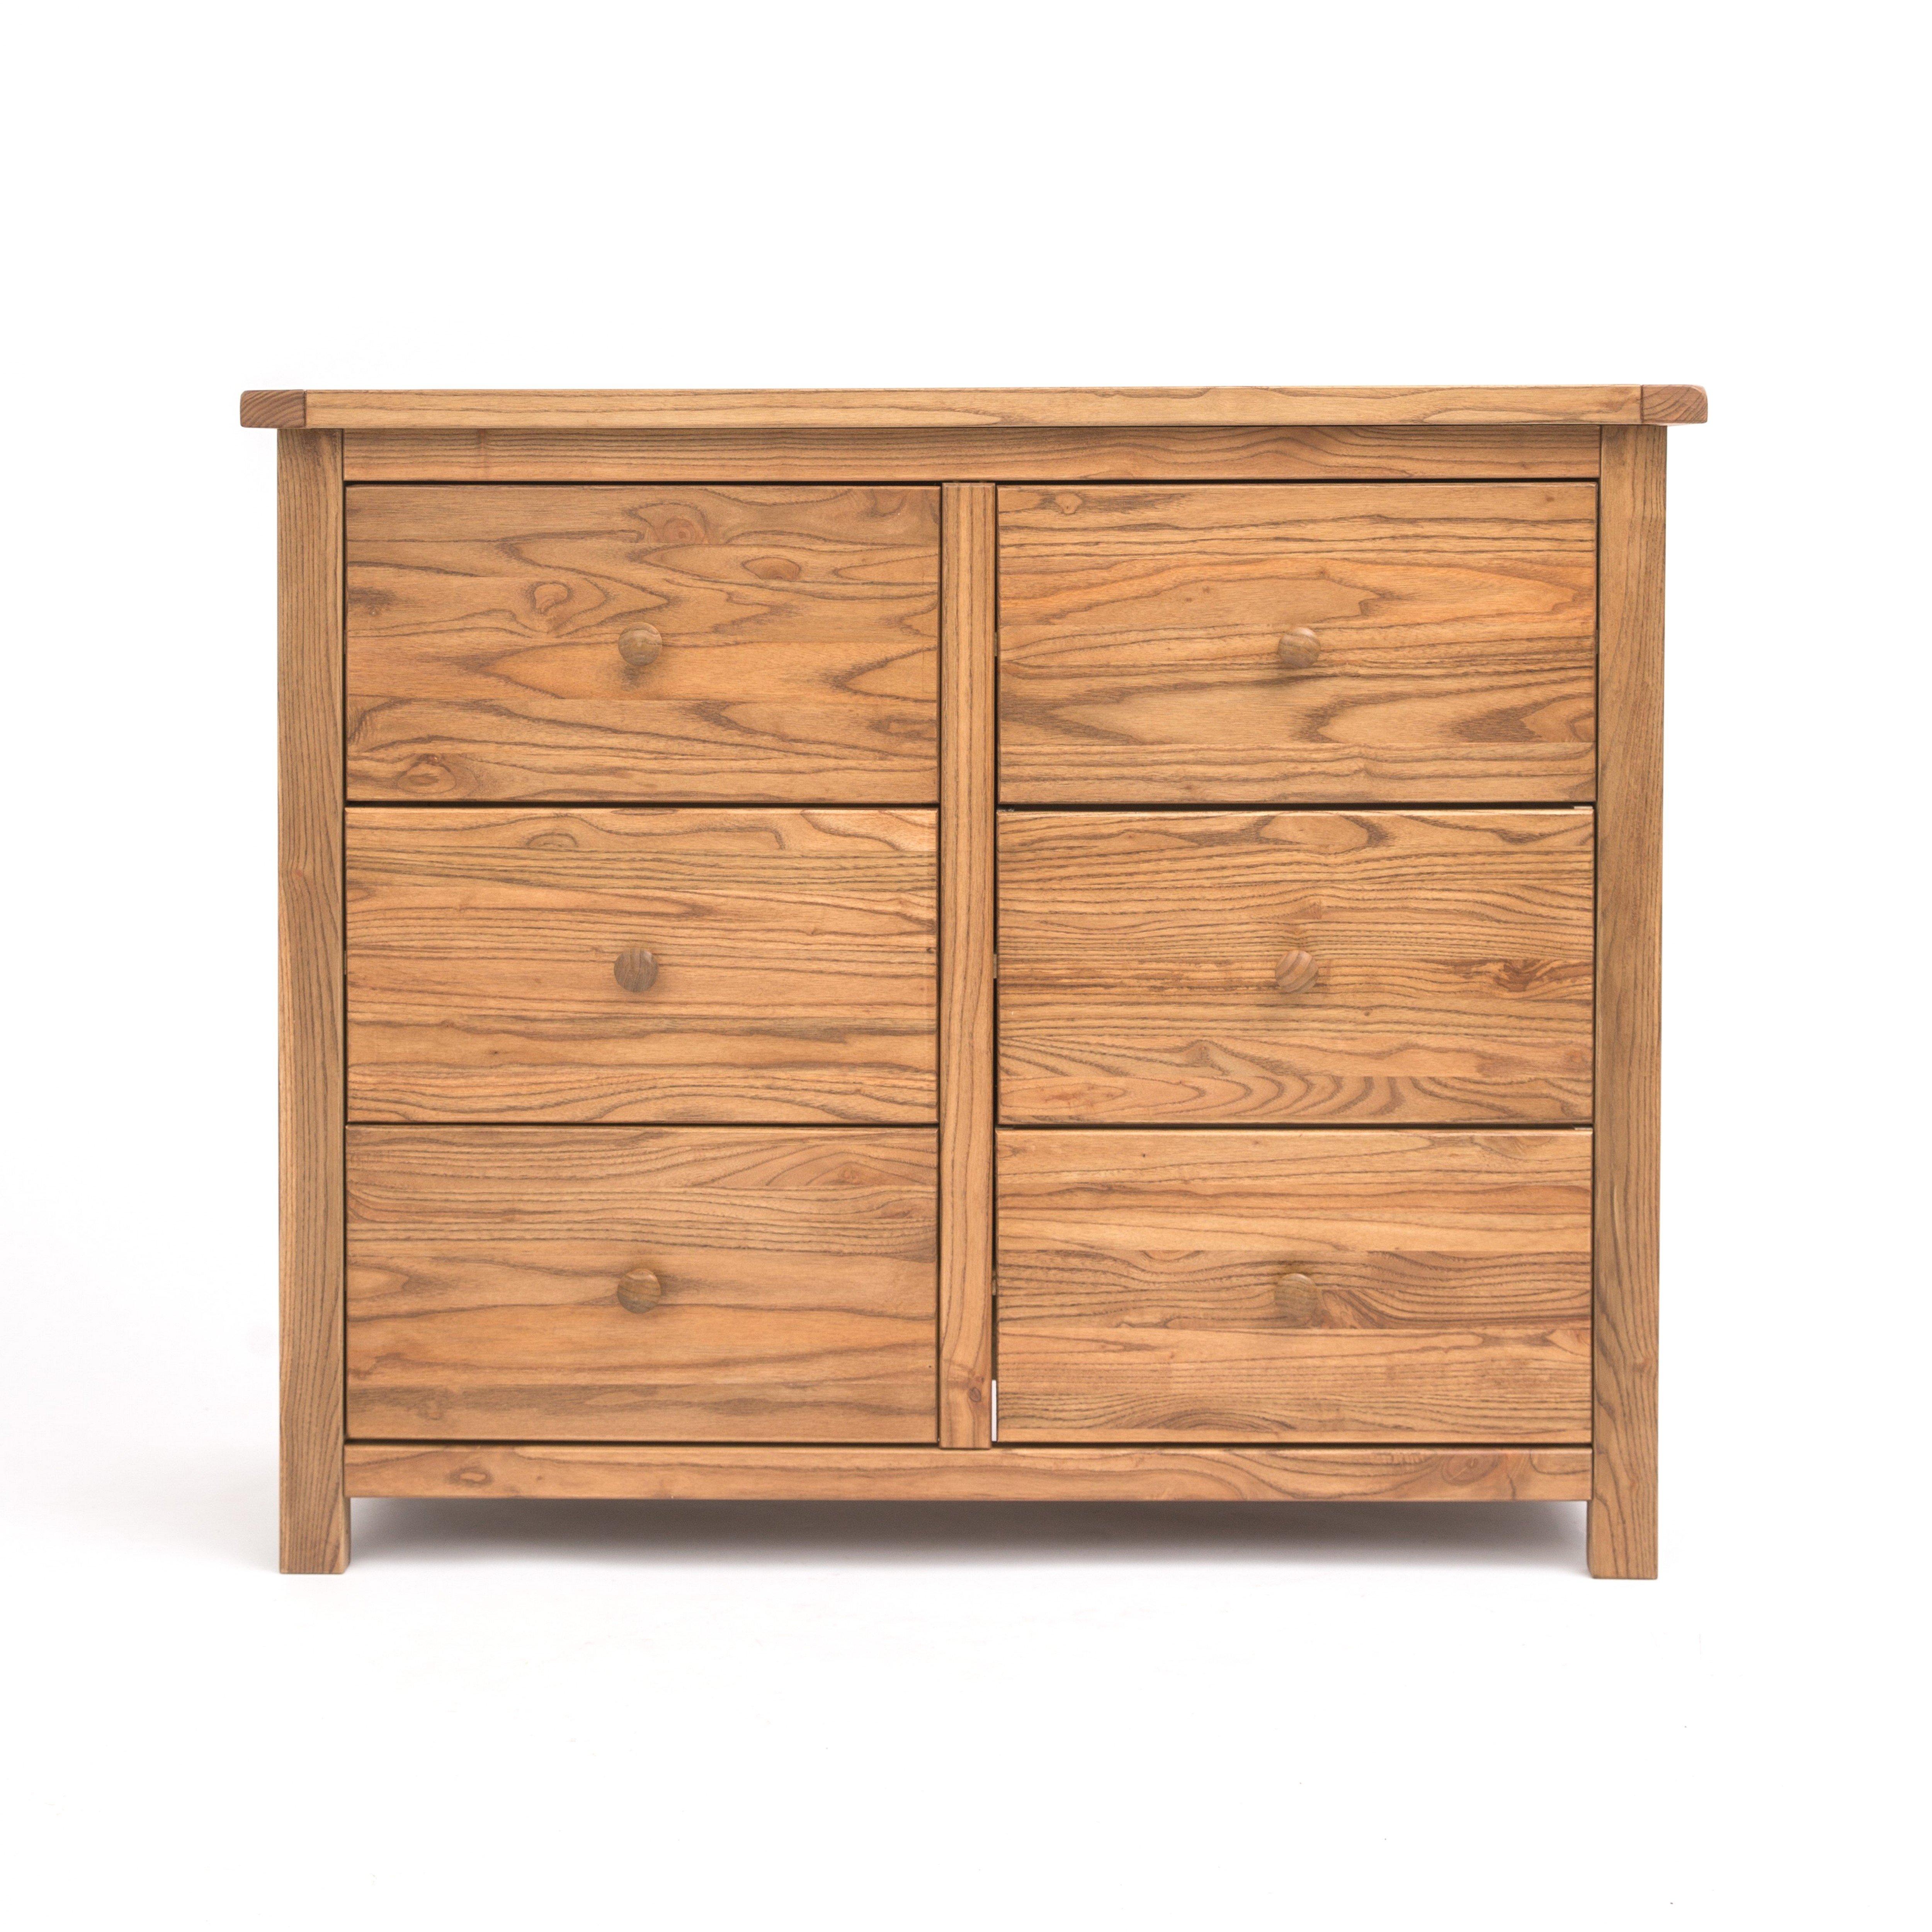 Trivento 6 Drawer Chest of Drawers Wood Knob